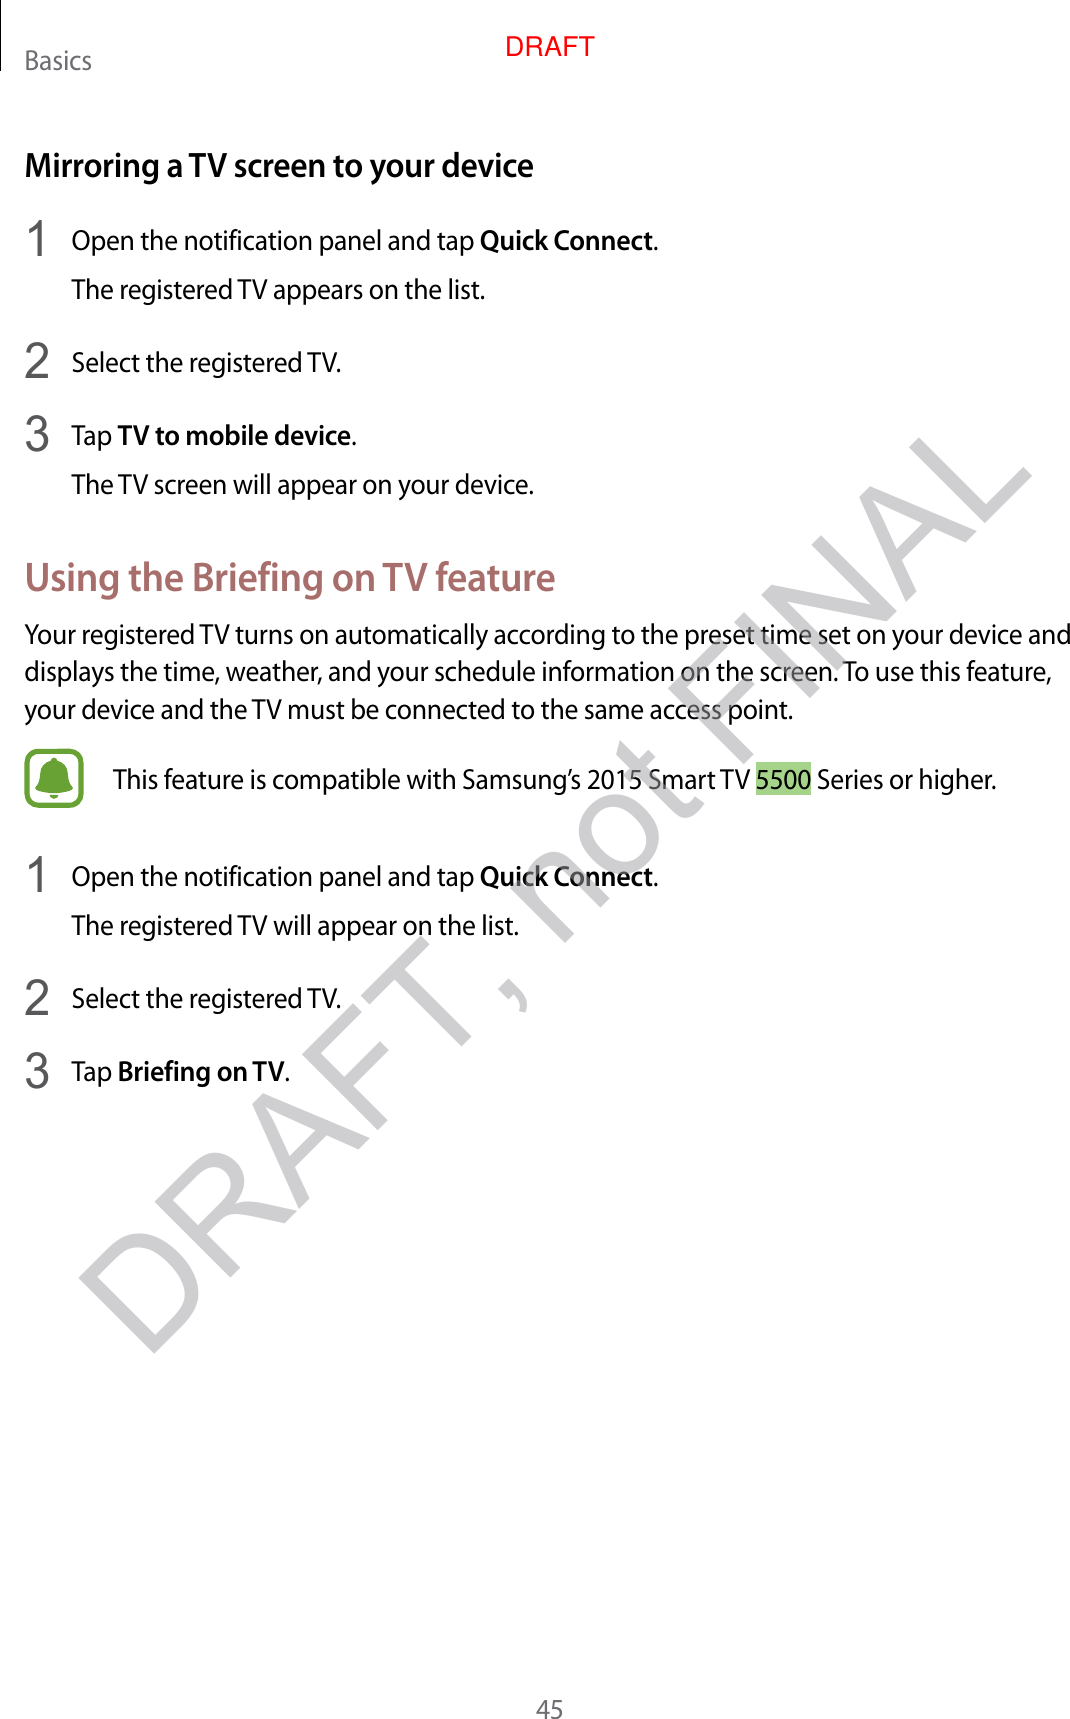 Basics45Mirroring a TV screen to your device1  Open the notification panel and tap Quick Connect.The registered TV appears on the list.2  Select the registered TV.3  Tap TV to mobile device.The TV screen will appear on your device.Using the Briefing on TV featureYour registered TV turns on automatically according to the preset time set on your device and displays the time, weather, and your schedule information on the screen. To use this feature, your device and the TV must be connected to the same access point.This feature is compatible with Samsung’s 2015 Smart TV 5500 Series or higher.1  Open the notification panel and tap Quick Connect.The registered TV will appear on the list.2  Select the registered TV.3  Tap Briefing on TV.DRAFT, not FINALDRAFT